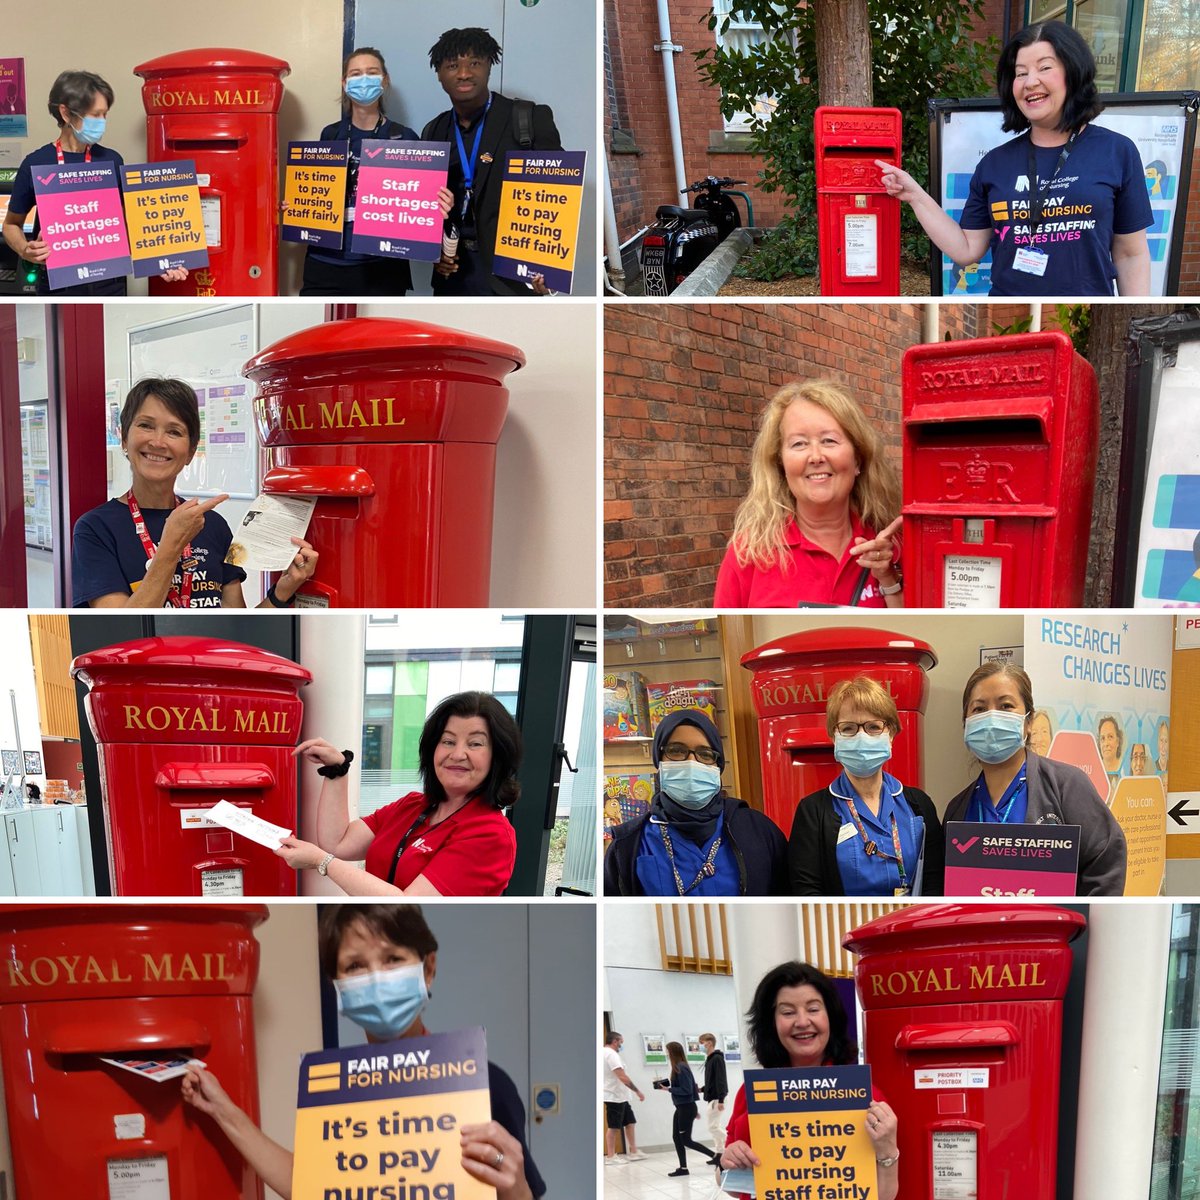 📮📮📮📮📮📮📮📮📮 Calling all RCN members on AfC contracts with #NHS If you do one thing this weekend, complete ✅ & post back your @theRCN #RCNStrike ballot 📨✊💪 So many NHS Trust hospitals have post boxes too👇 #SafeStaffingSavesLives #FairPayForNursing @RCNEastMids